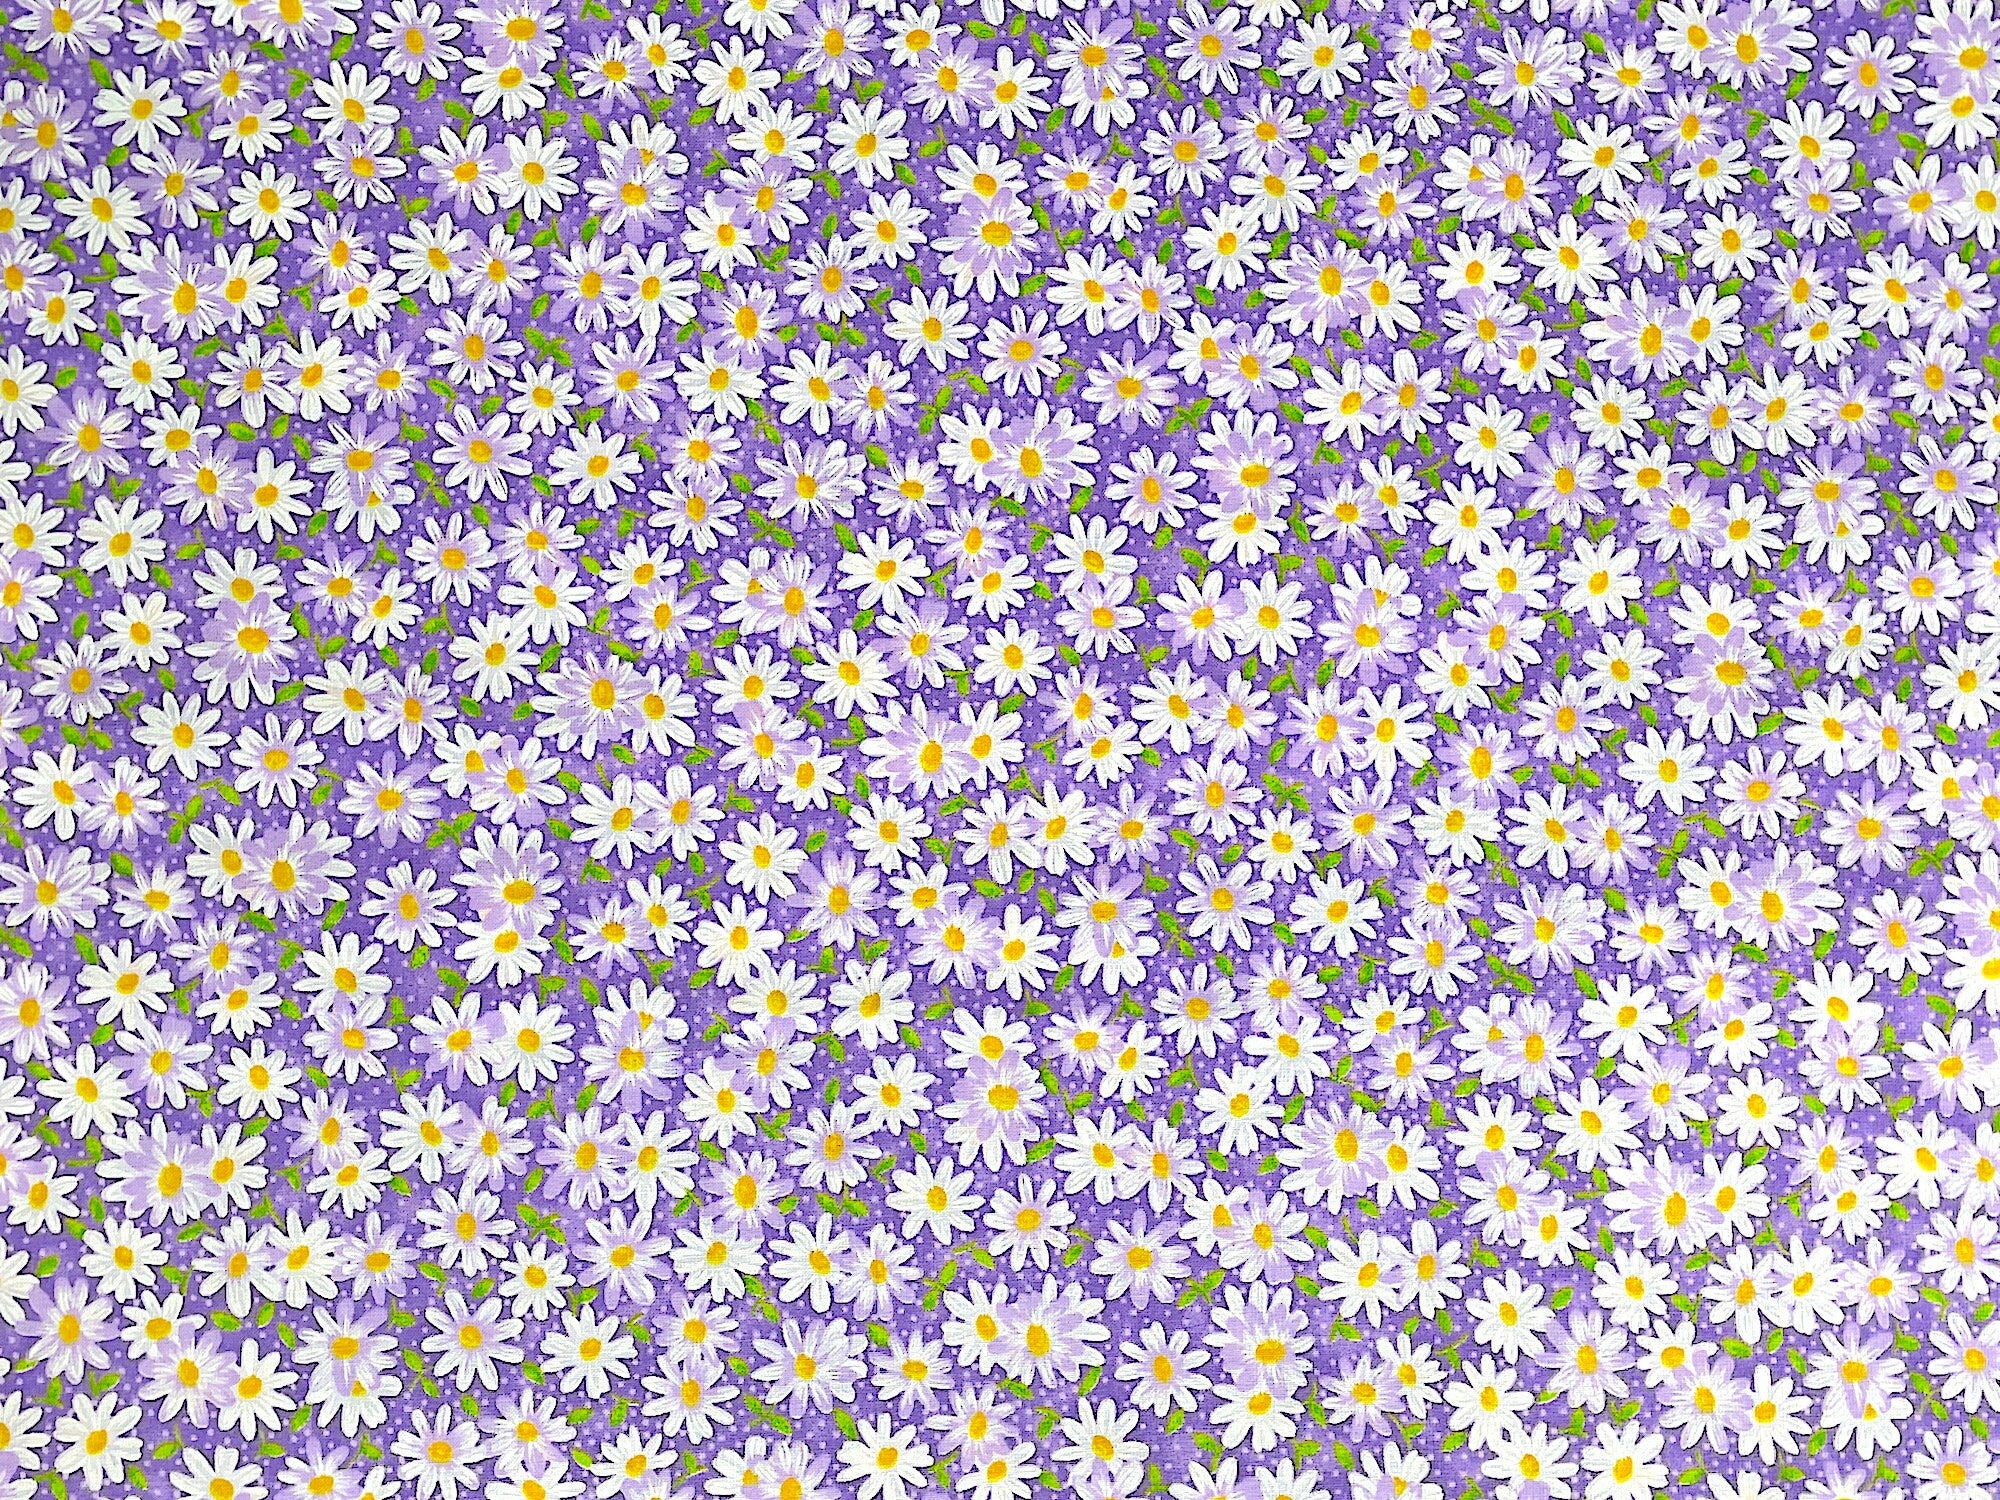 White Daisies with yellow centers on a purple background